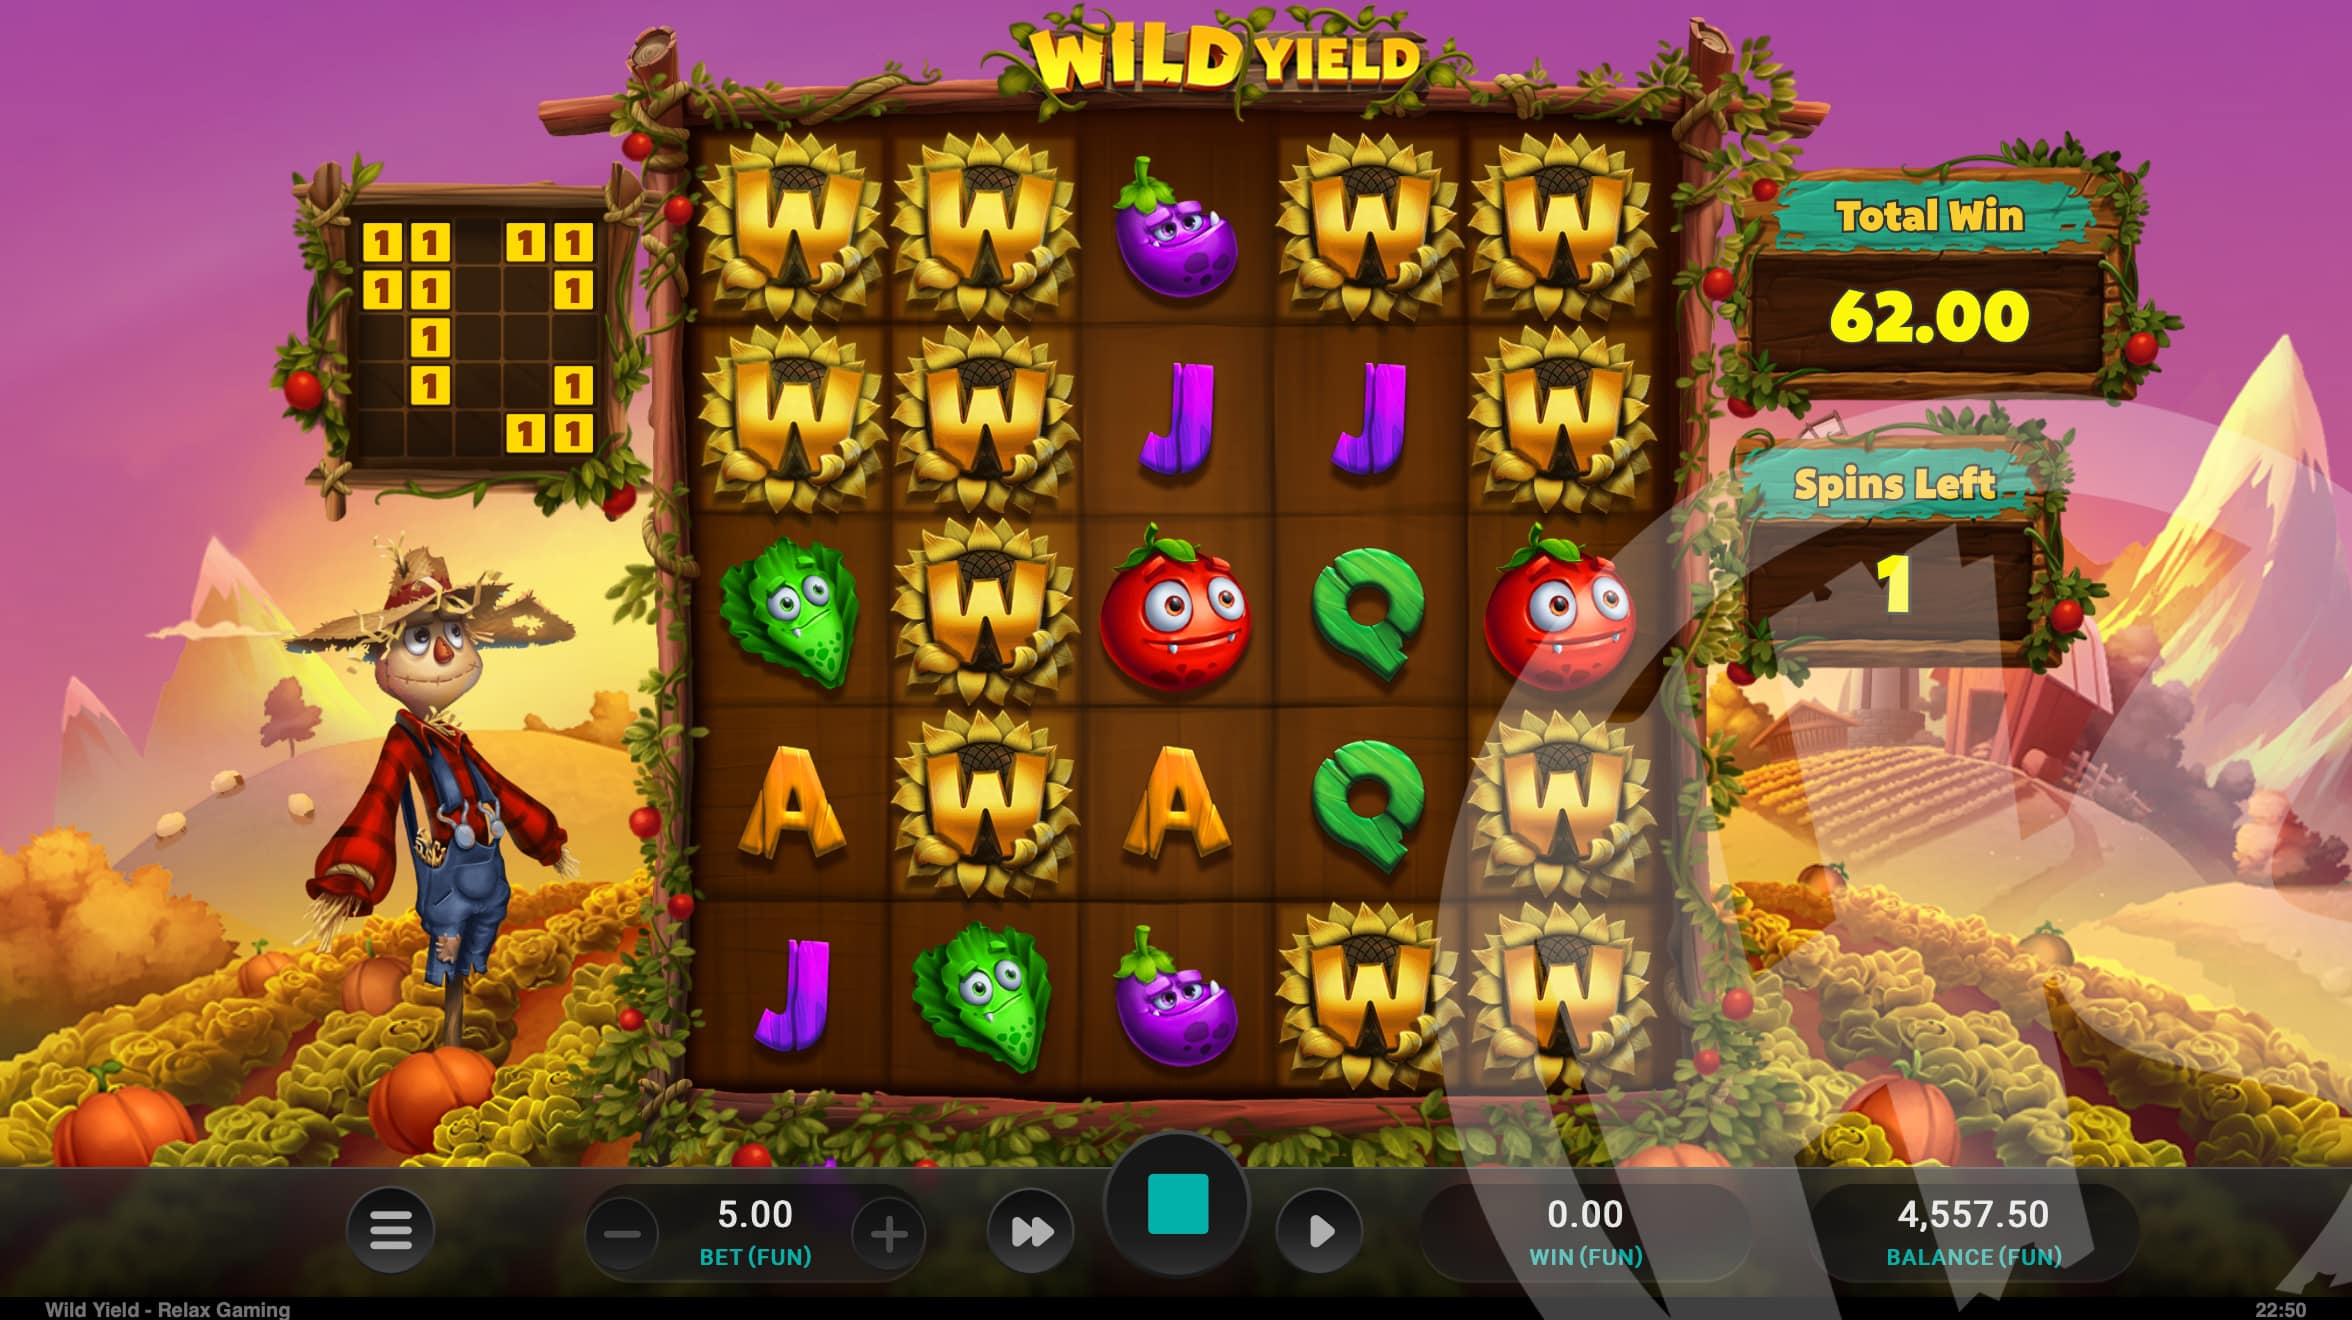 Wild Yield Free Spins